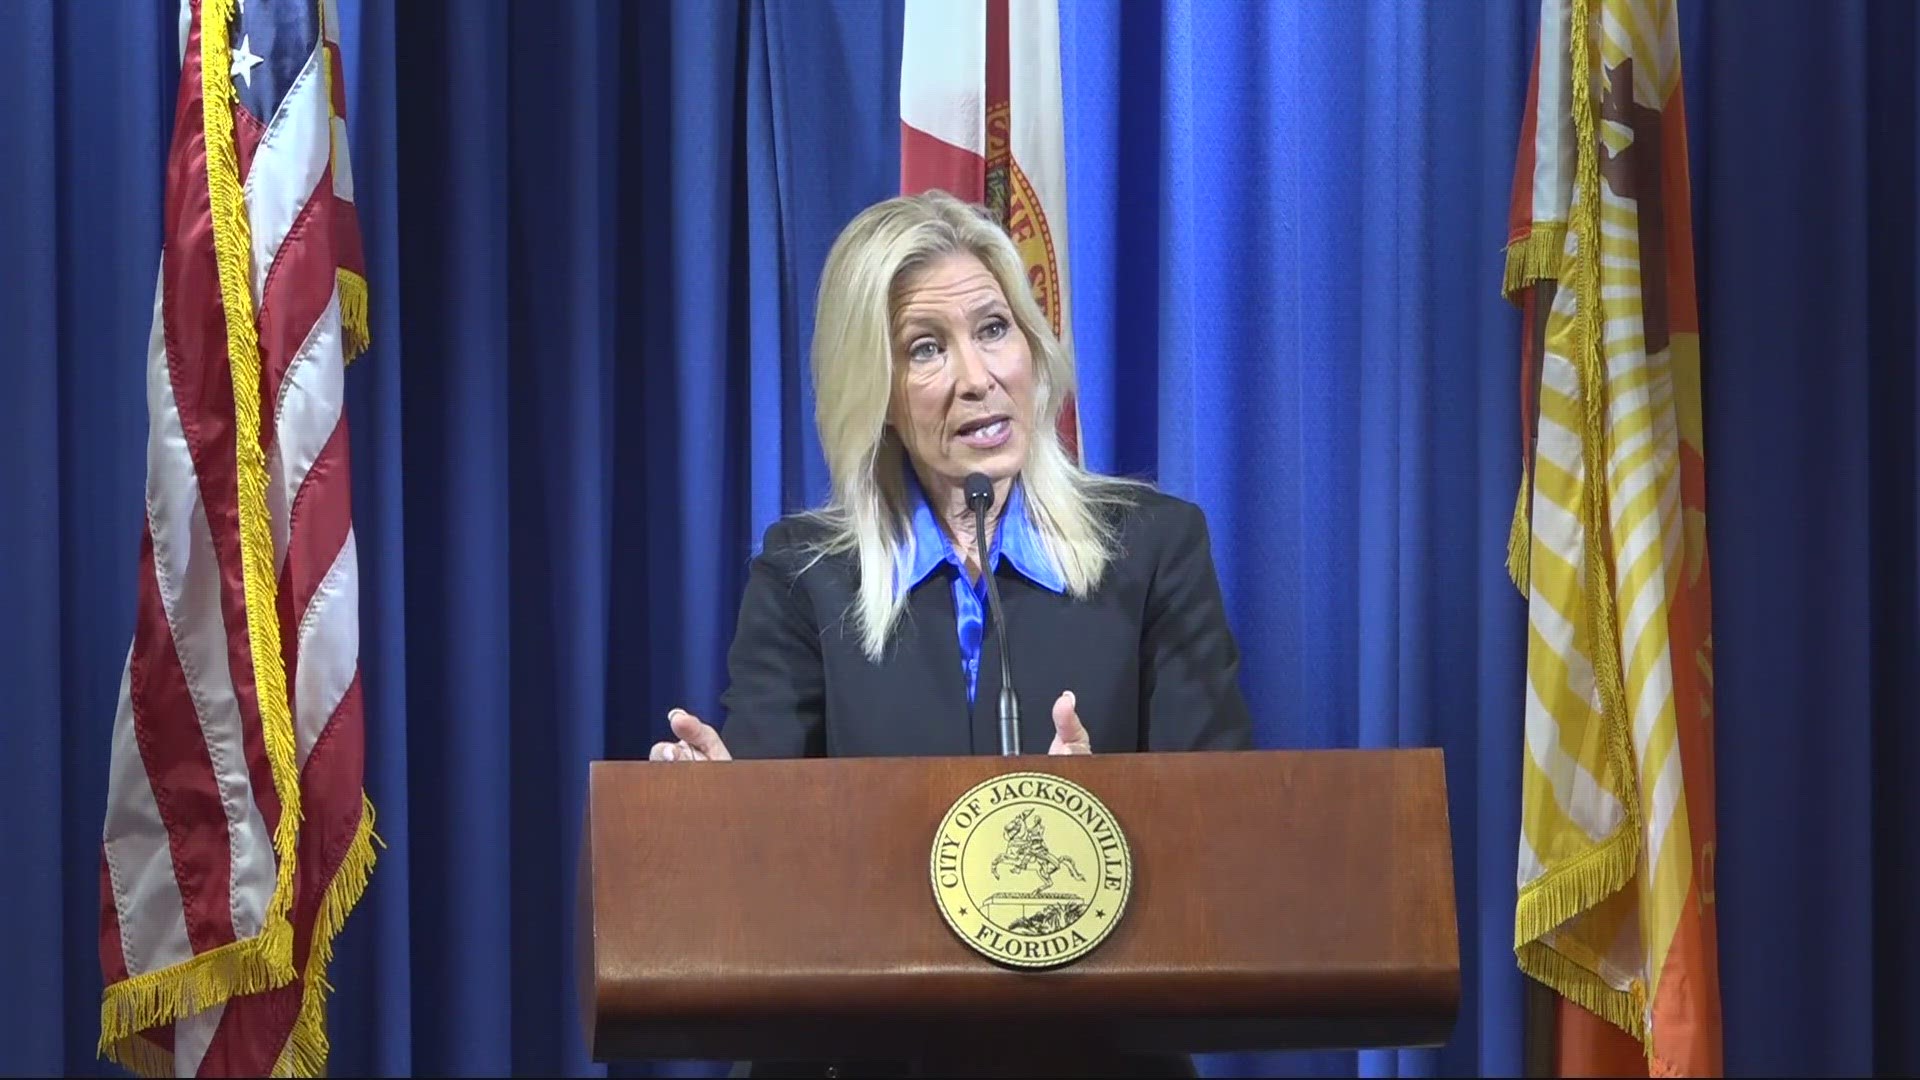 Jacksonville Mayor Donna Deegan introduced her first city budget Monday totaling about $1.7 billion.